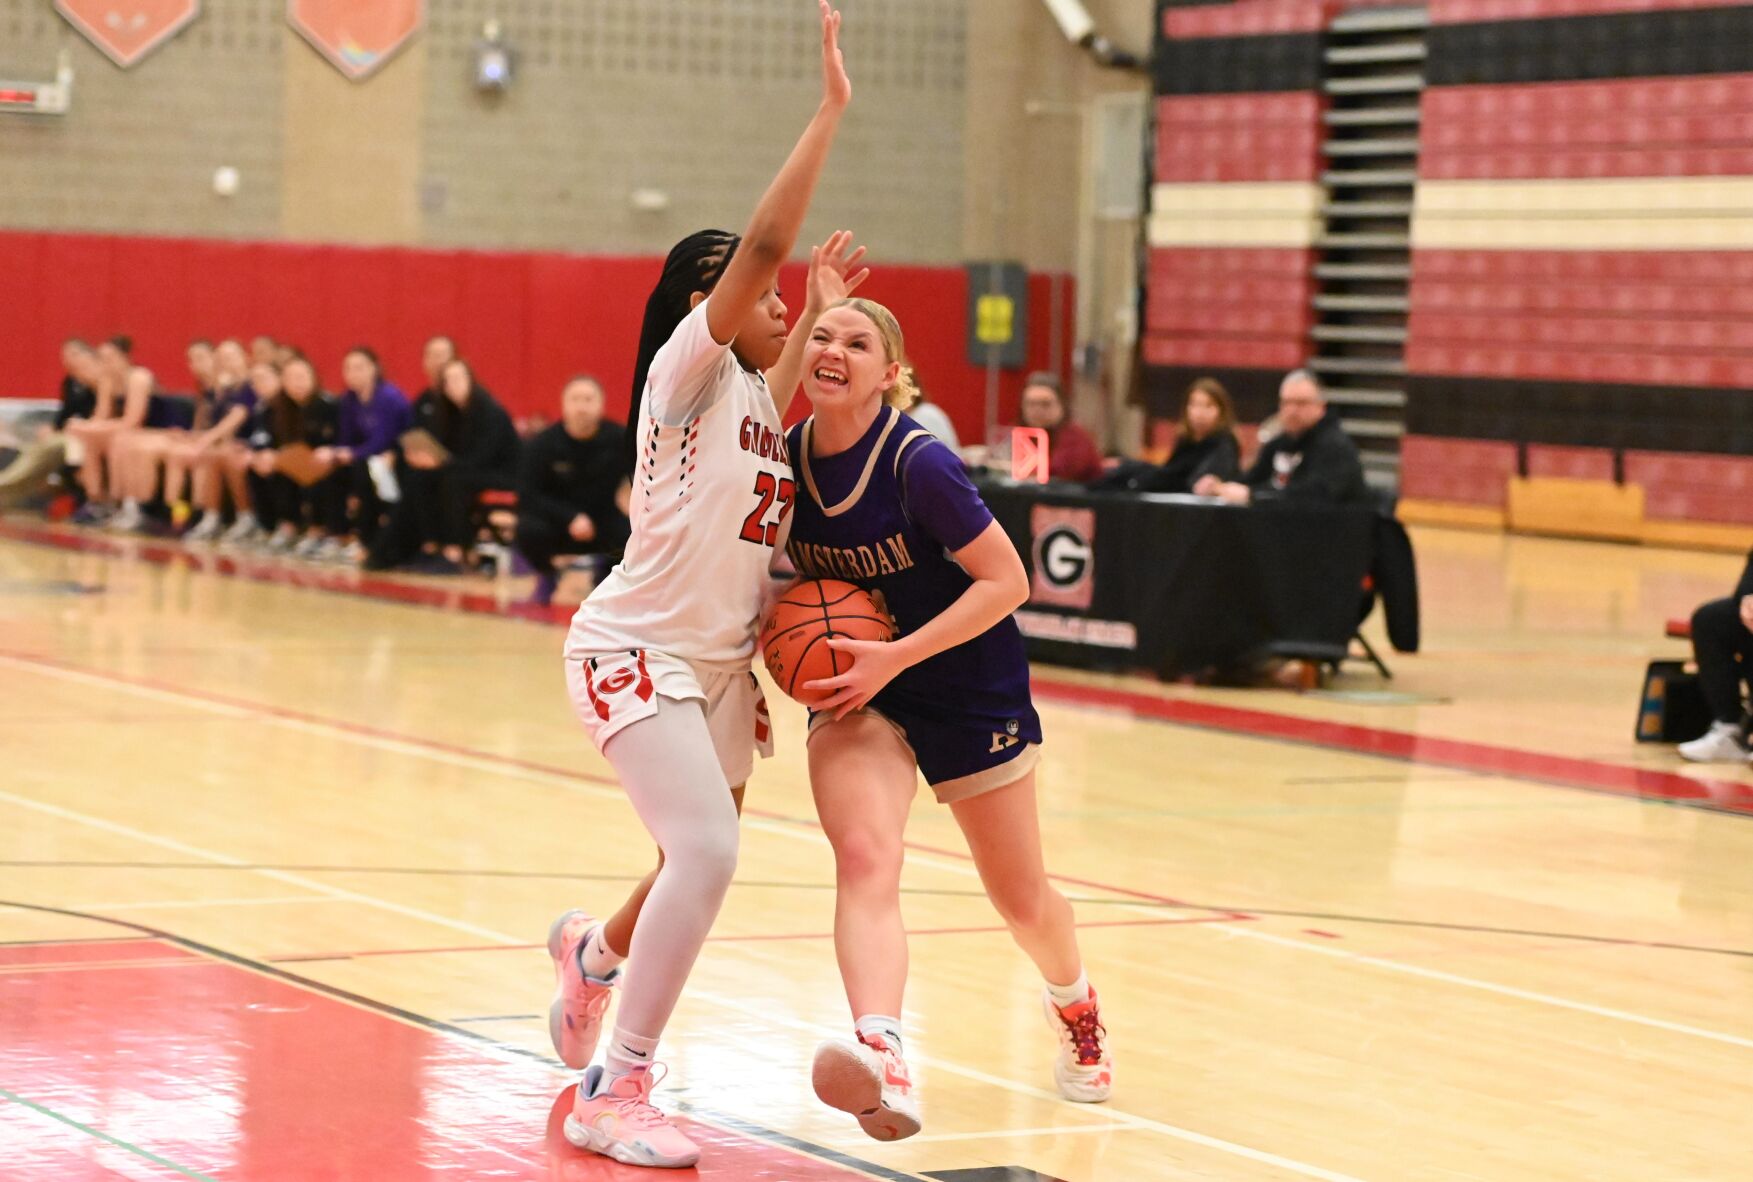 Exciting Showdown as Guilderland Defeats Amsterdam 67-49 in Section 2 Class AA Tournament